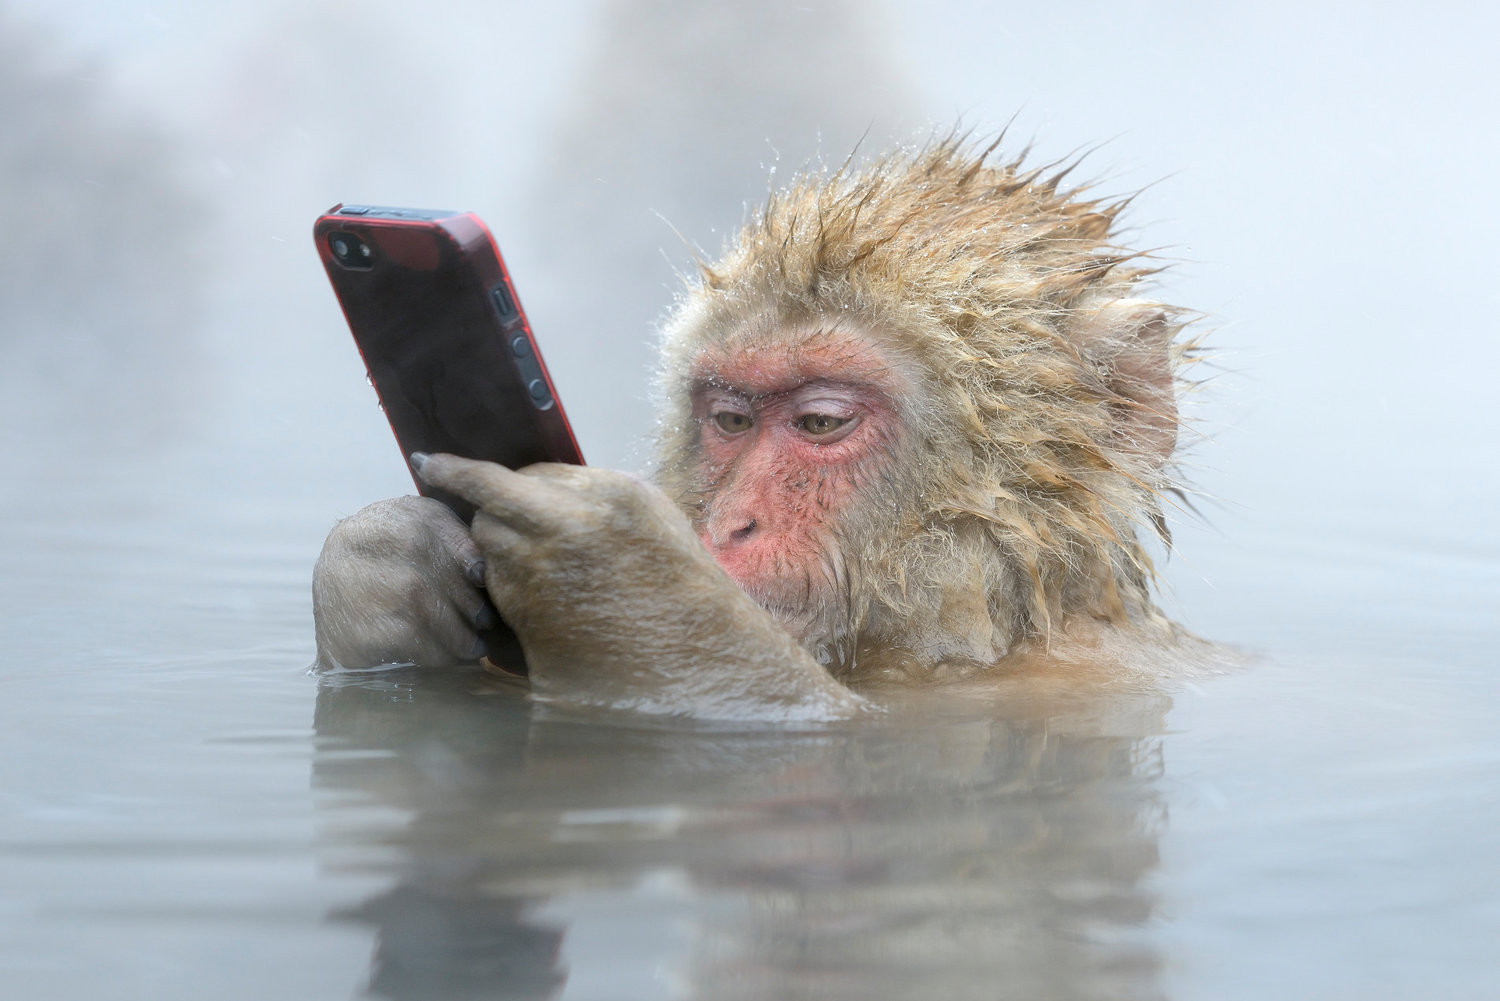 The “Unforgettable Behavior: Wildlife Photographer of the Year” exhibit at the National Museum of Natural History includes this photo of a Japanese macaque checking his Facebook feed while taking a bath in a hot spring.